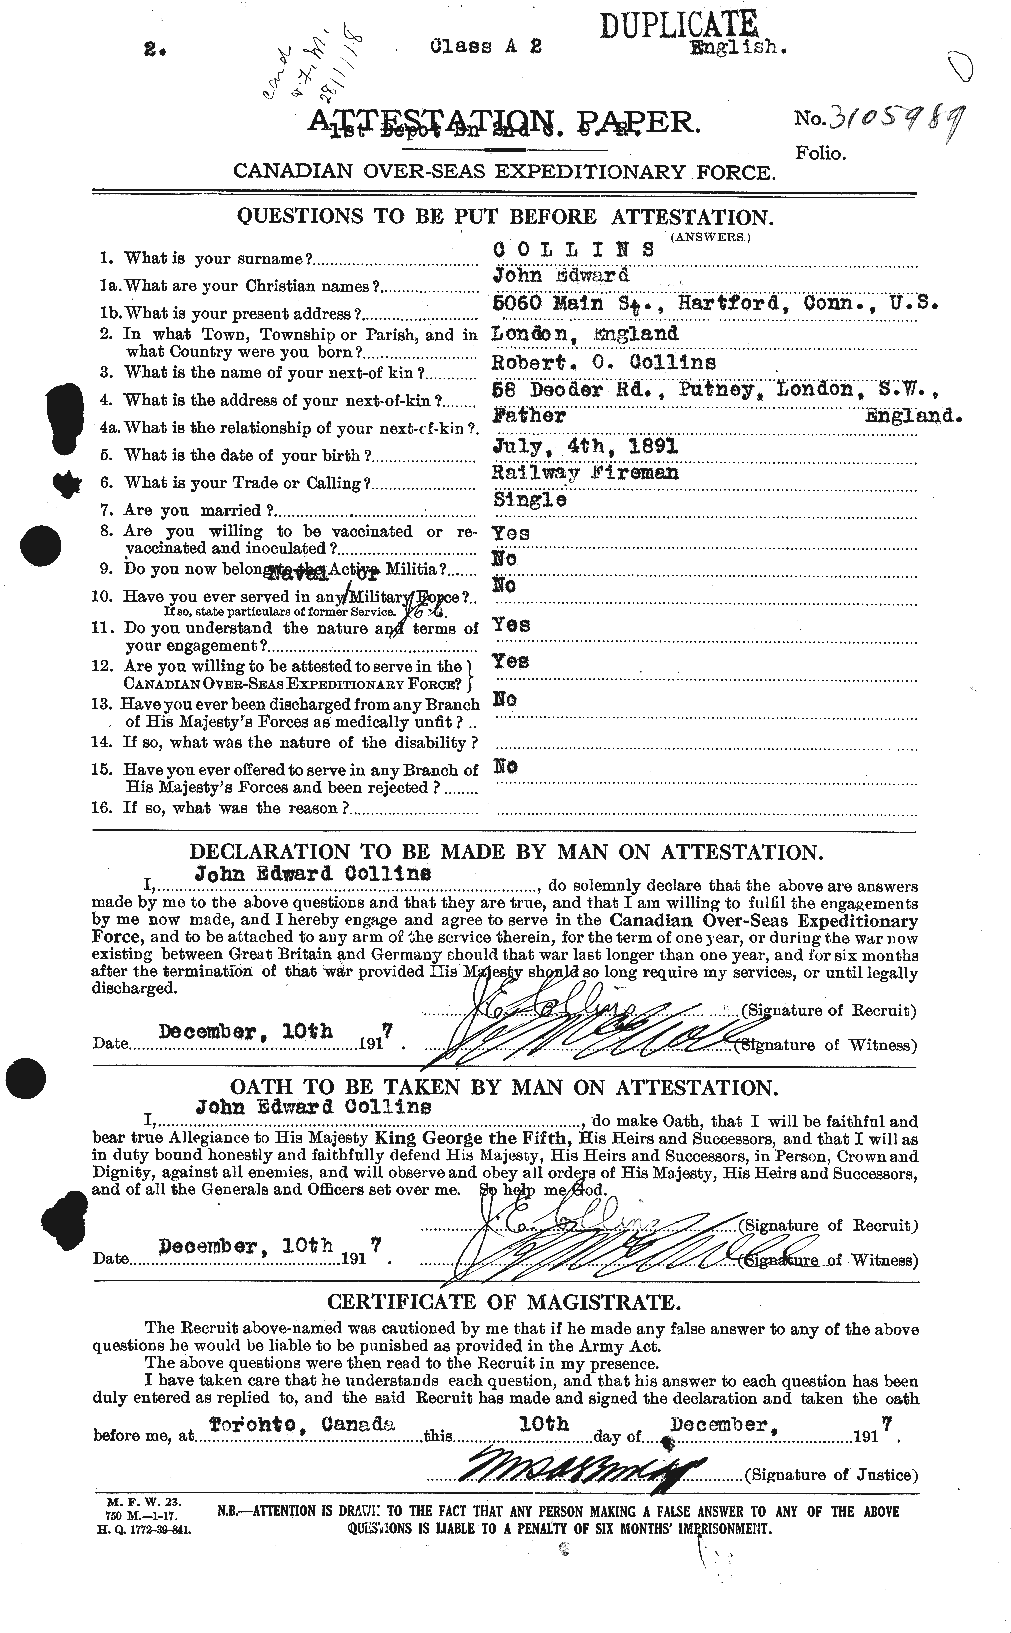 Personnel Records of the First World War - CEF 069778a